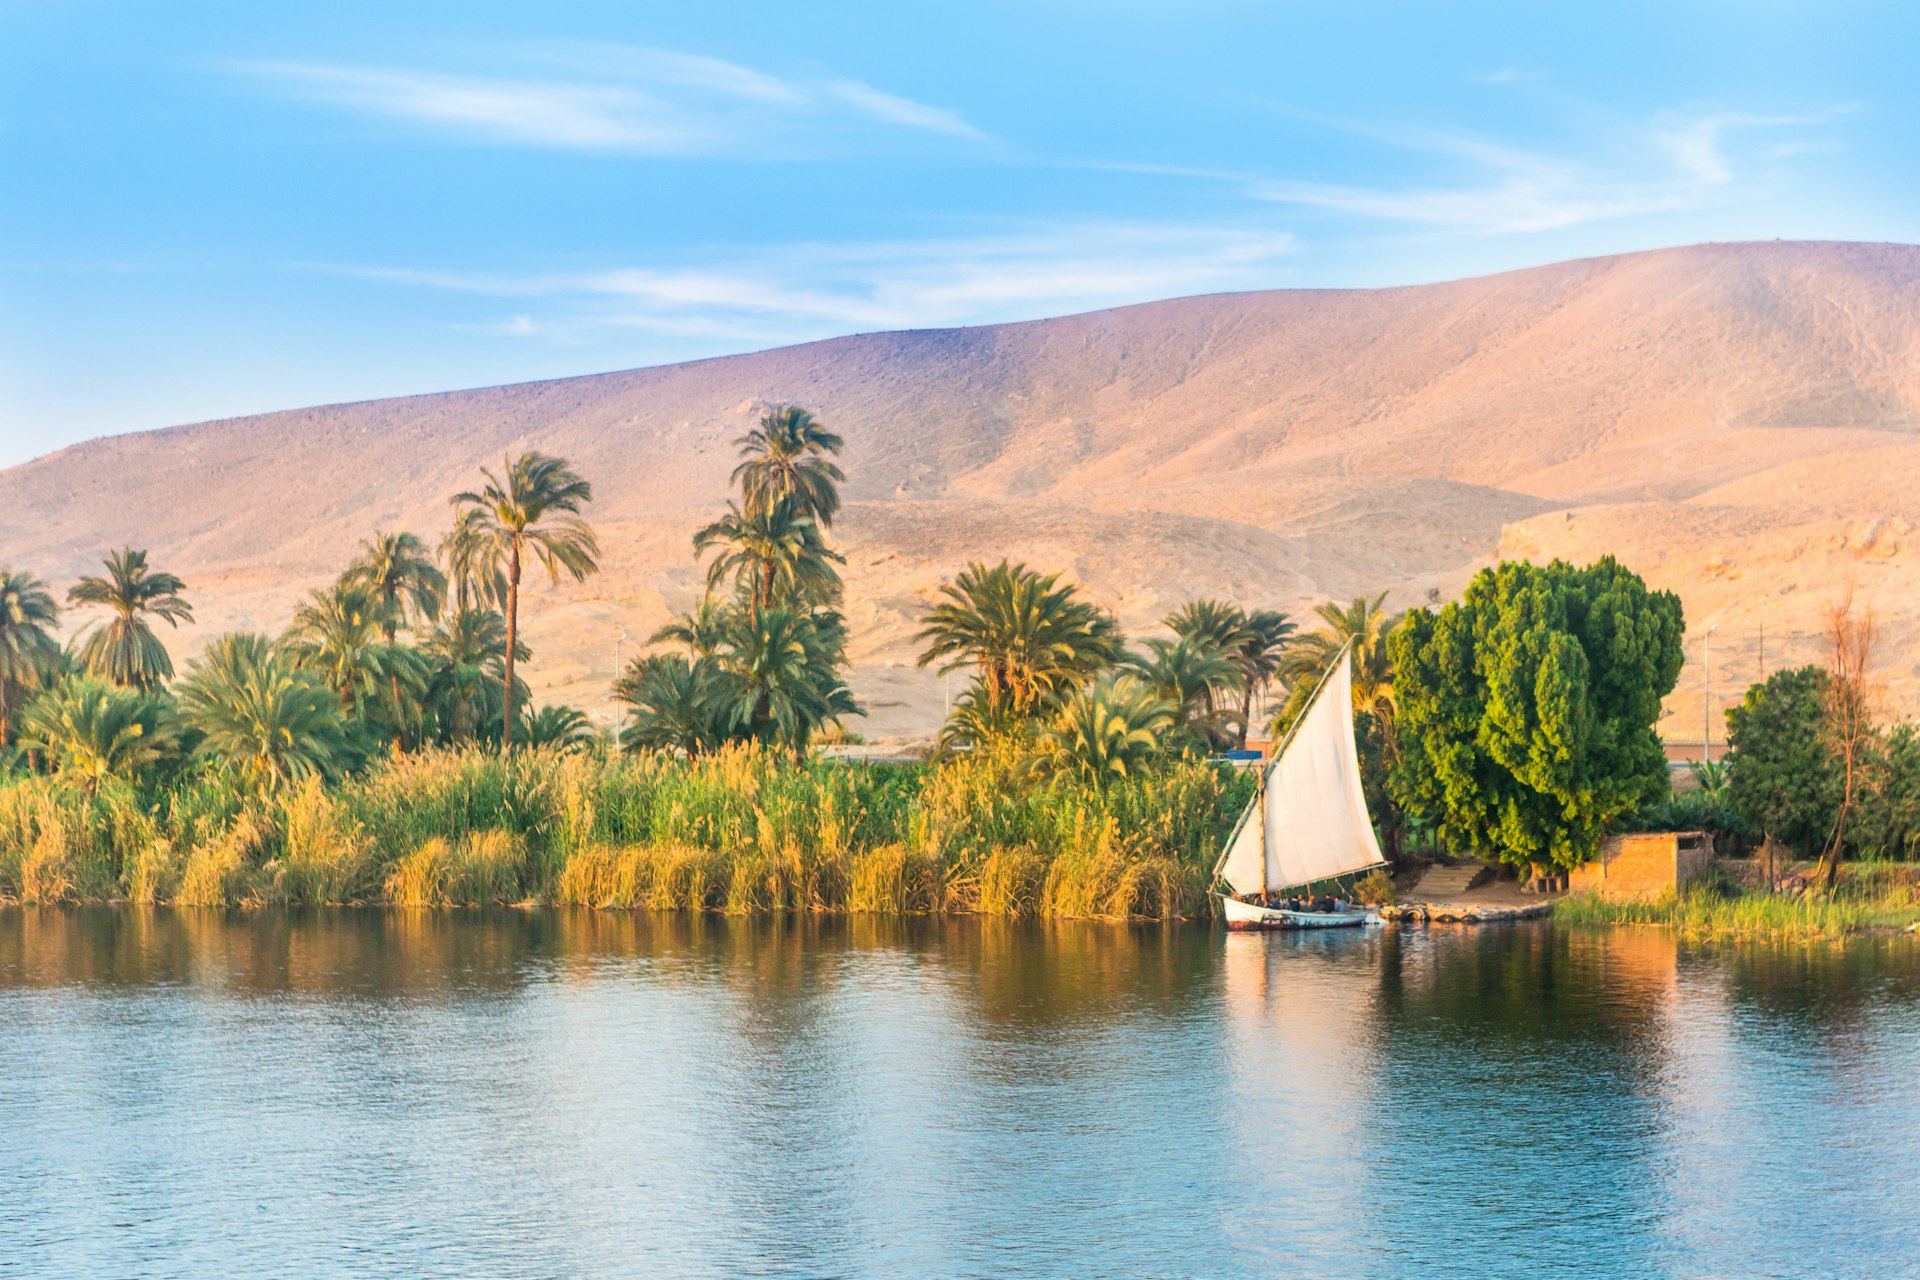 Felucca on the river Nile in Egypt. Luxor, Africa. 